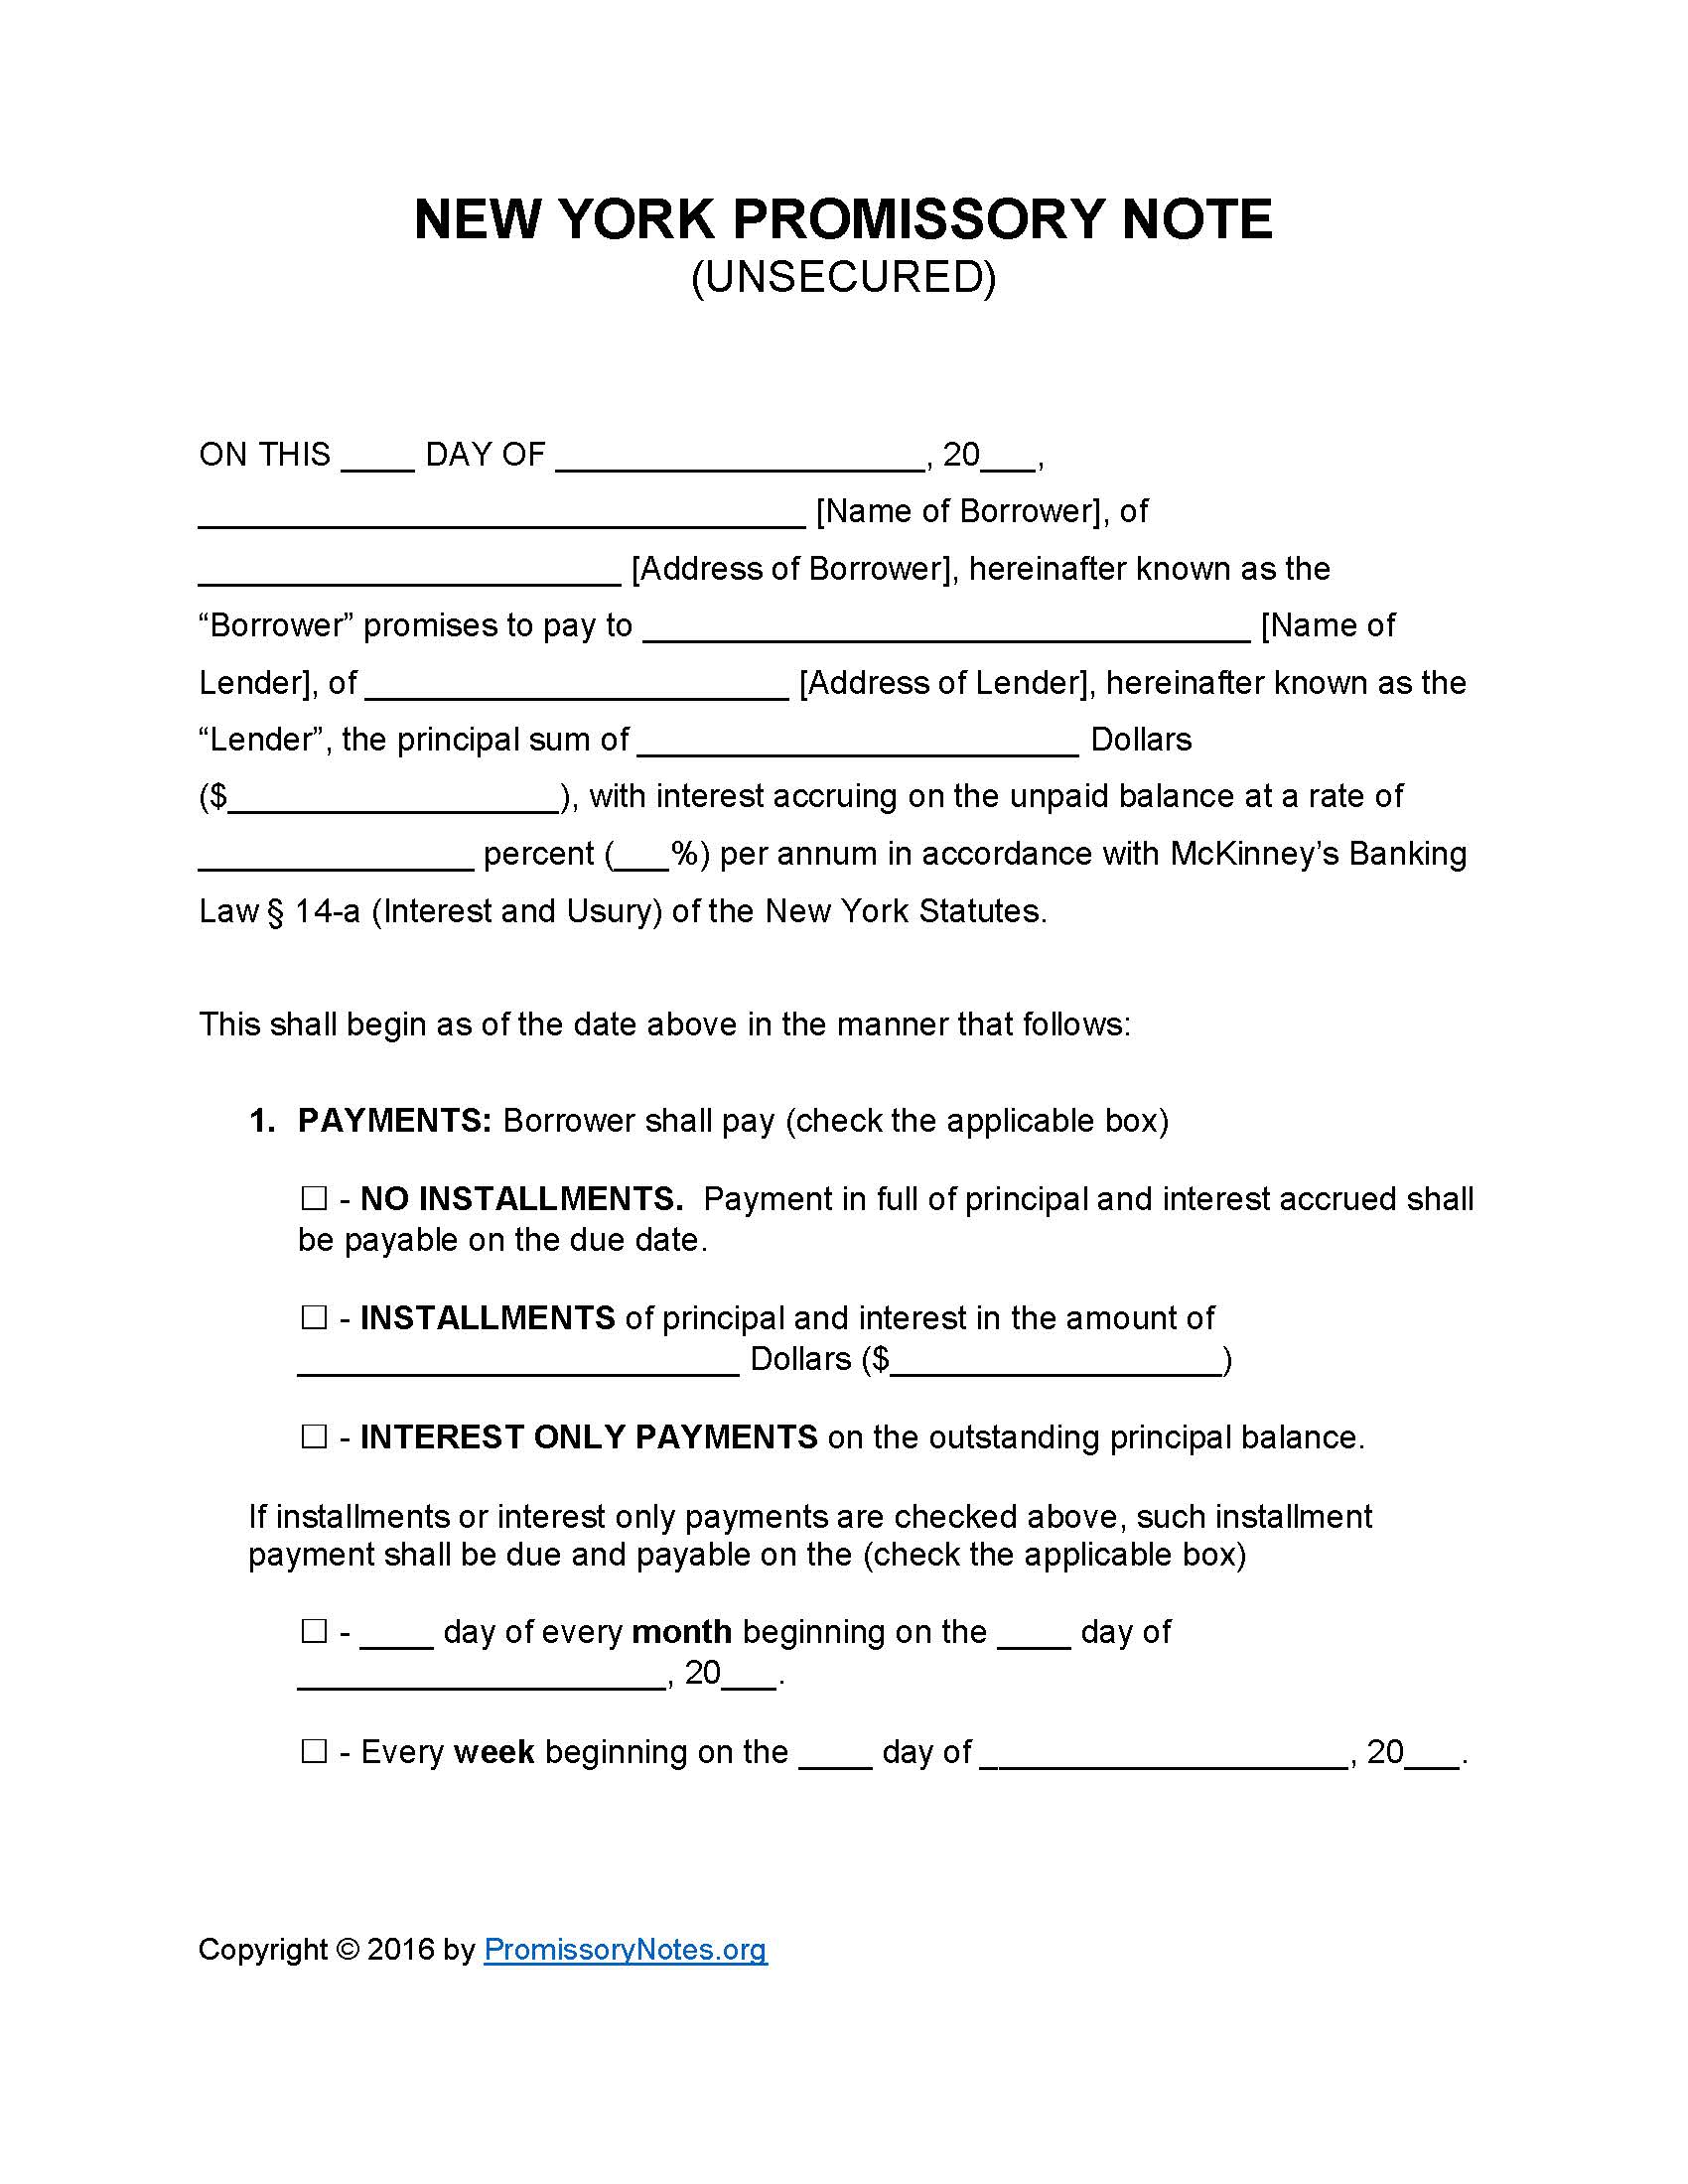 New York Unsecured Promissory Note Template Promissory Notes Promissory Notes